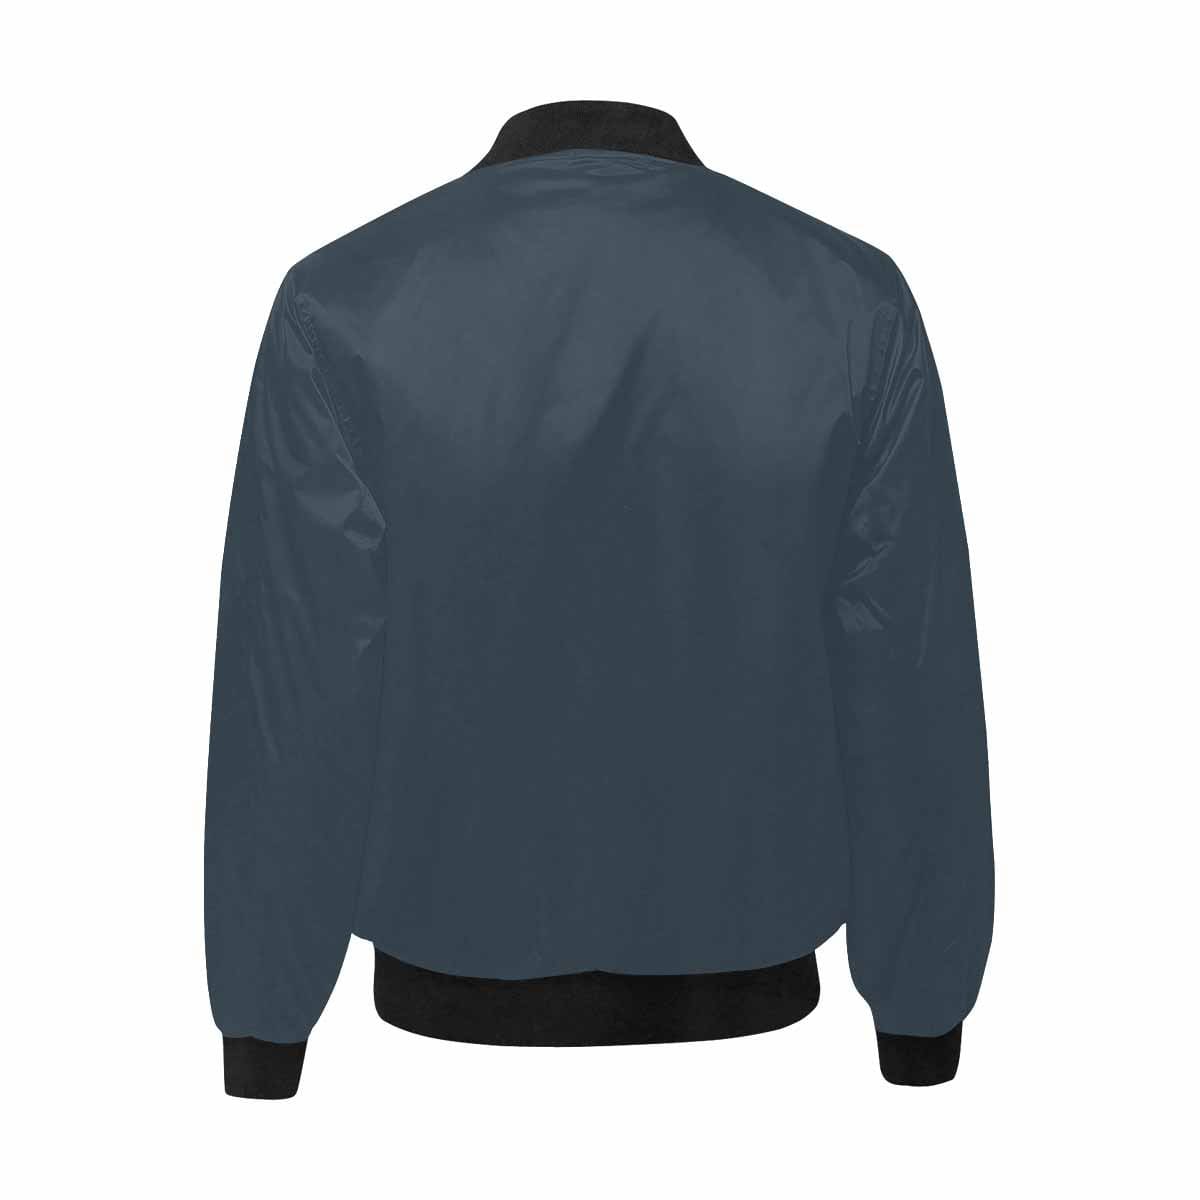 Bomber Jacket For Men Charcoal Black And Black - Mens | Jackets | Bombers